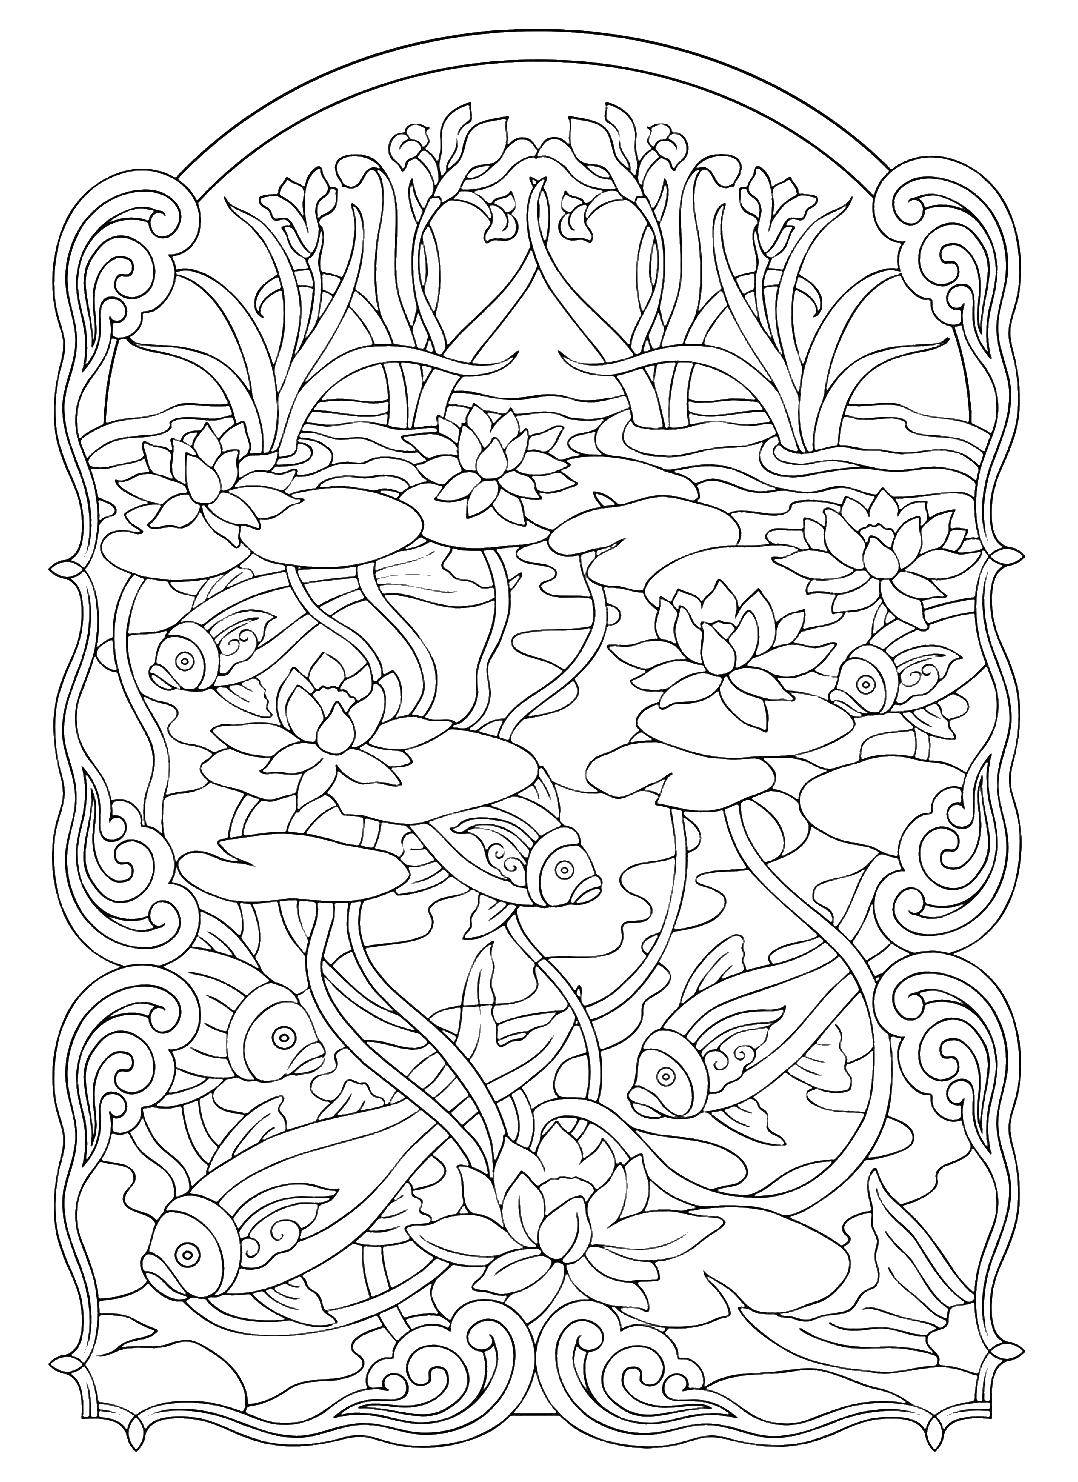 Coloring Coloring antistress. Category coloring antistress. Tags:  patterns, shapes, stress relief.